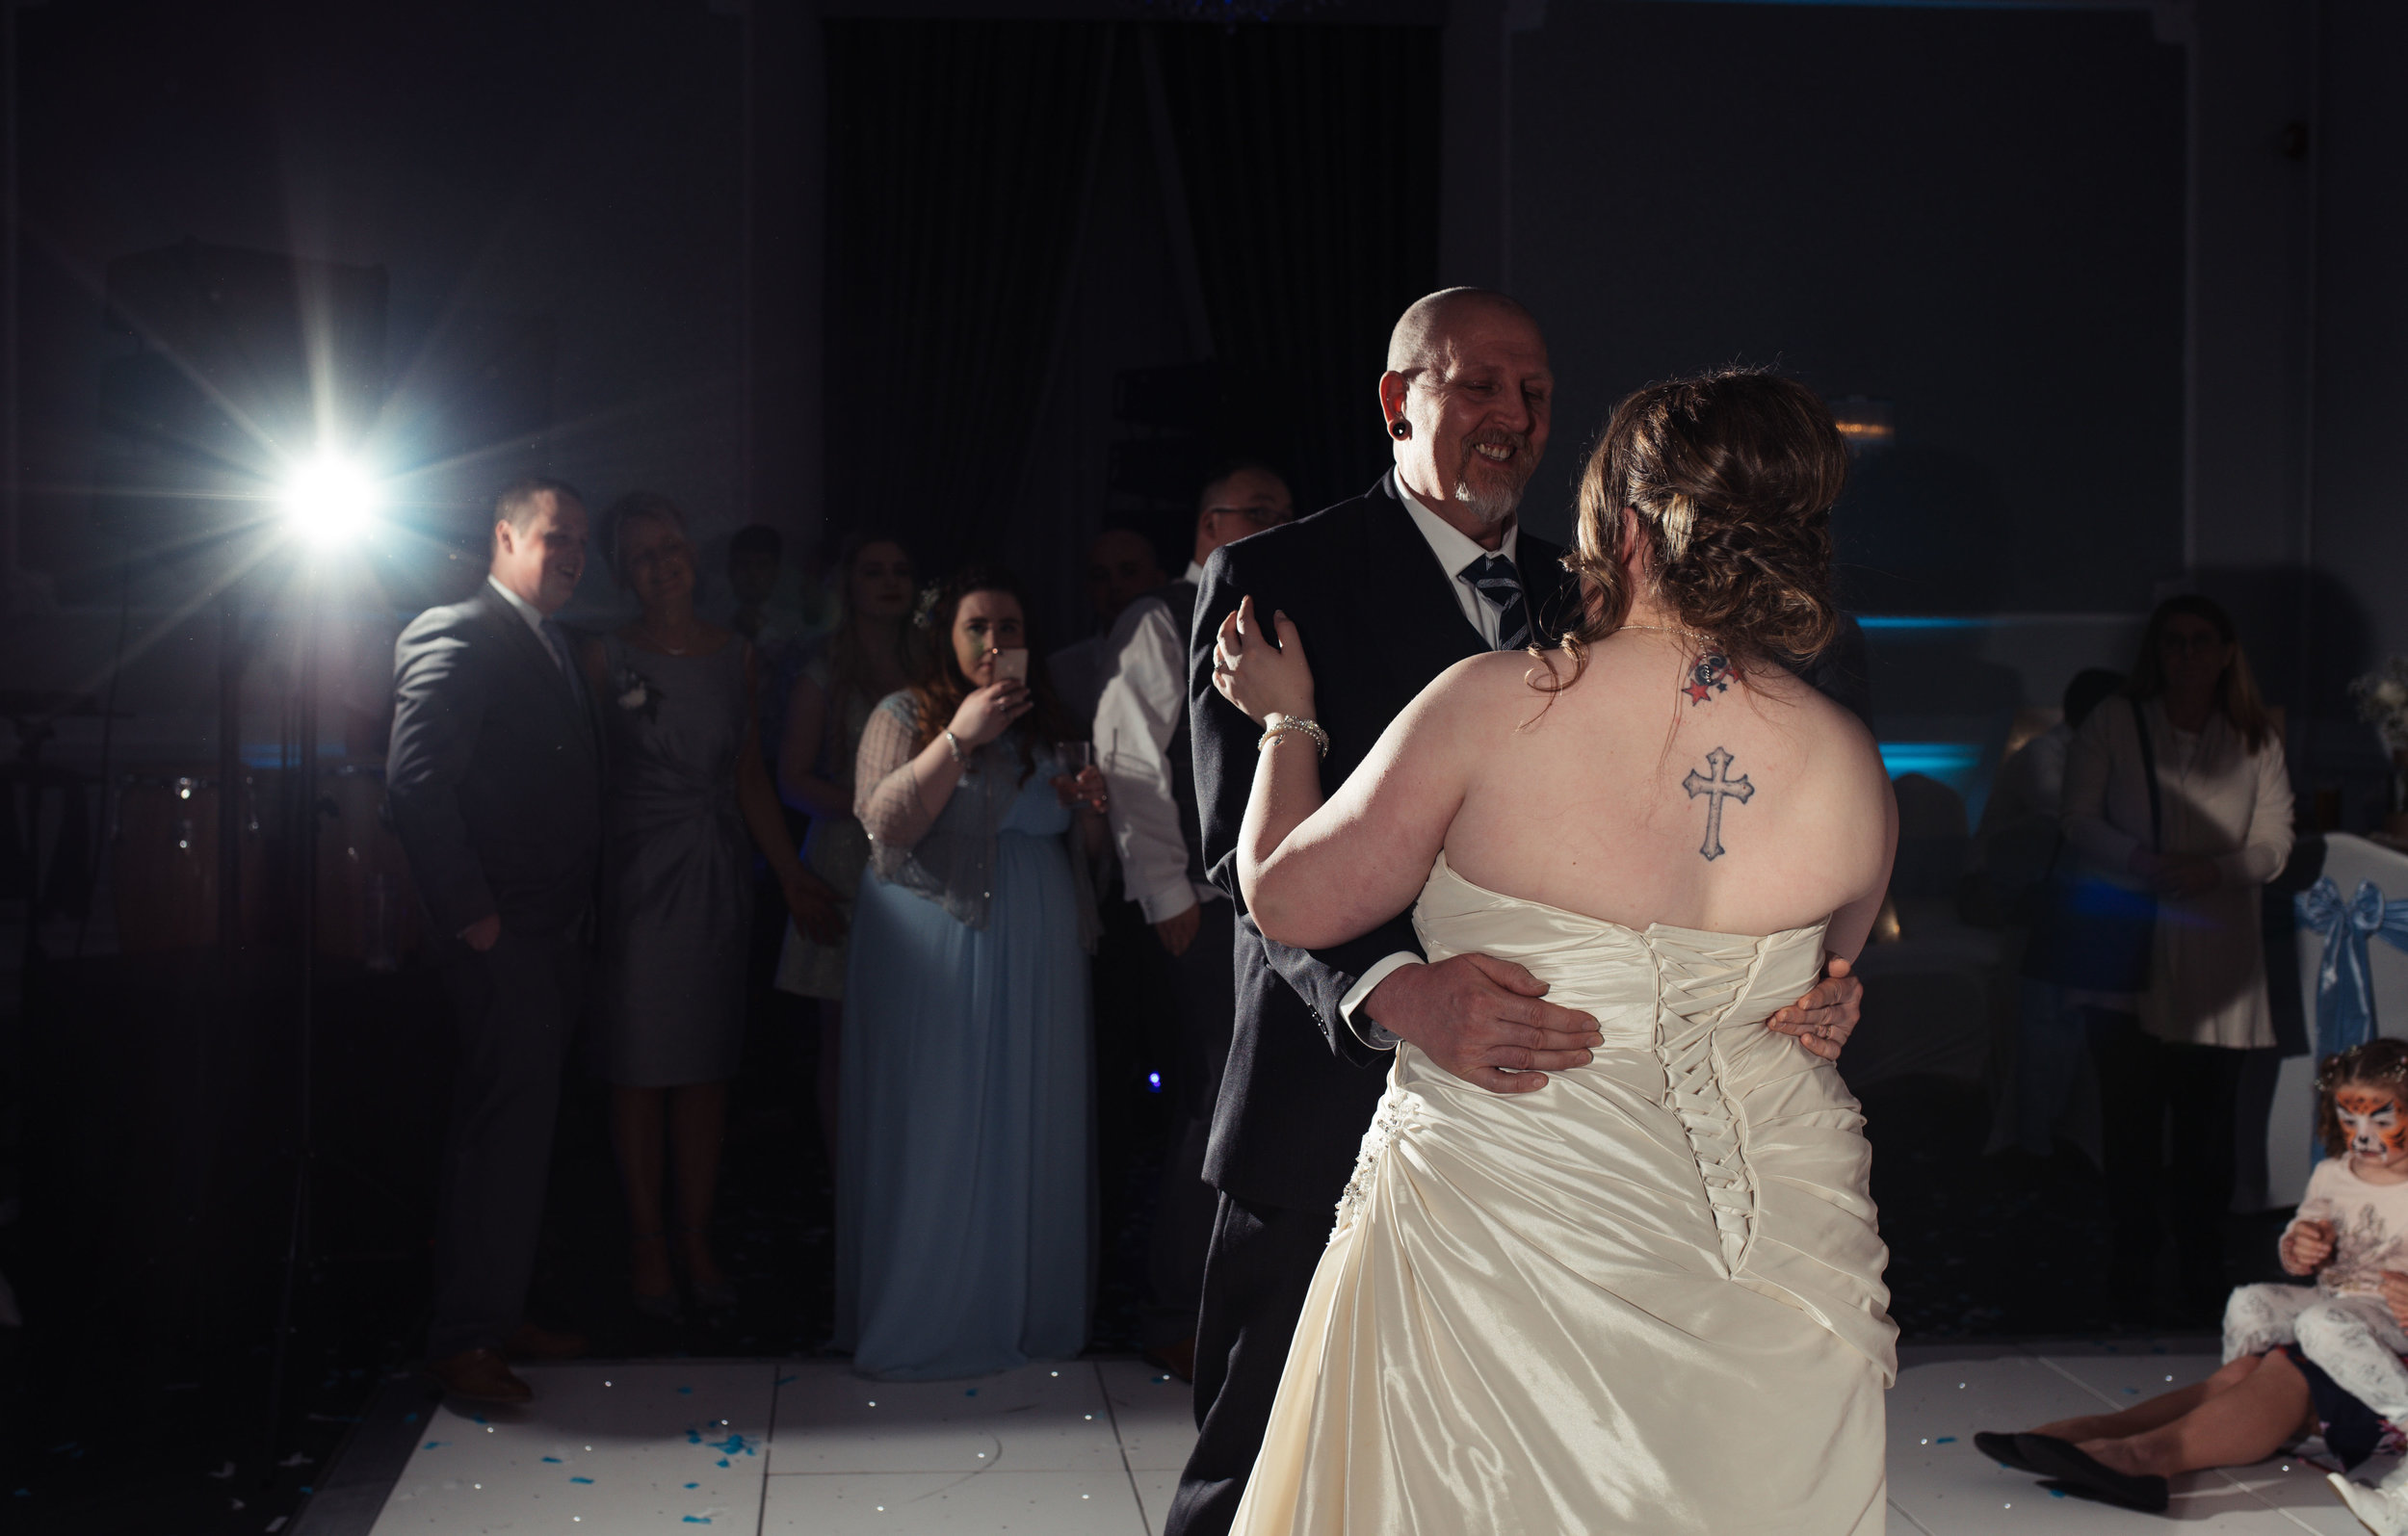 The bride has a dance with her father during the evening wedding reception